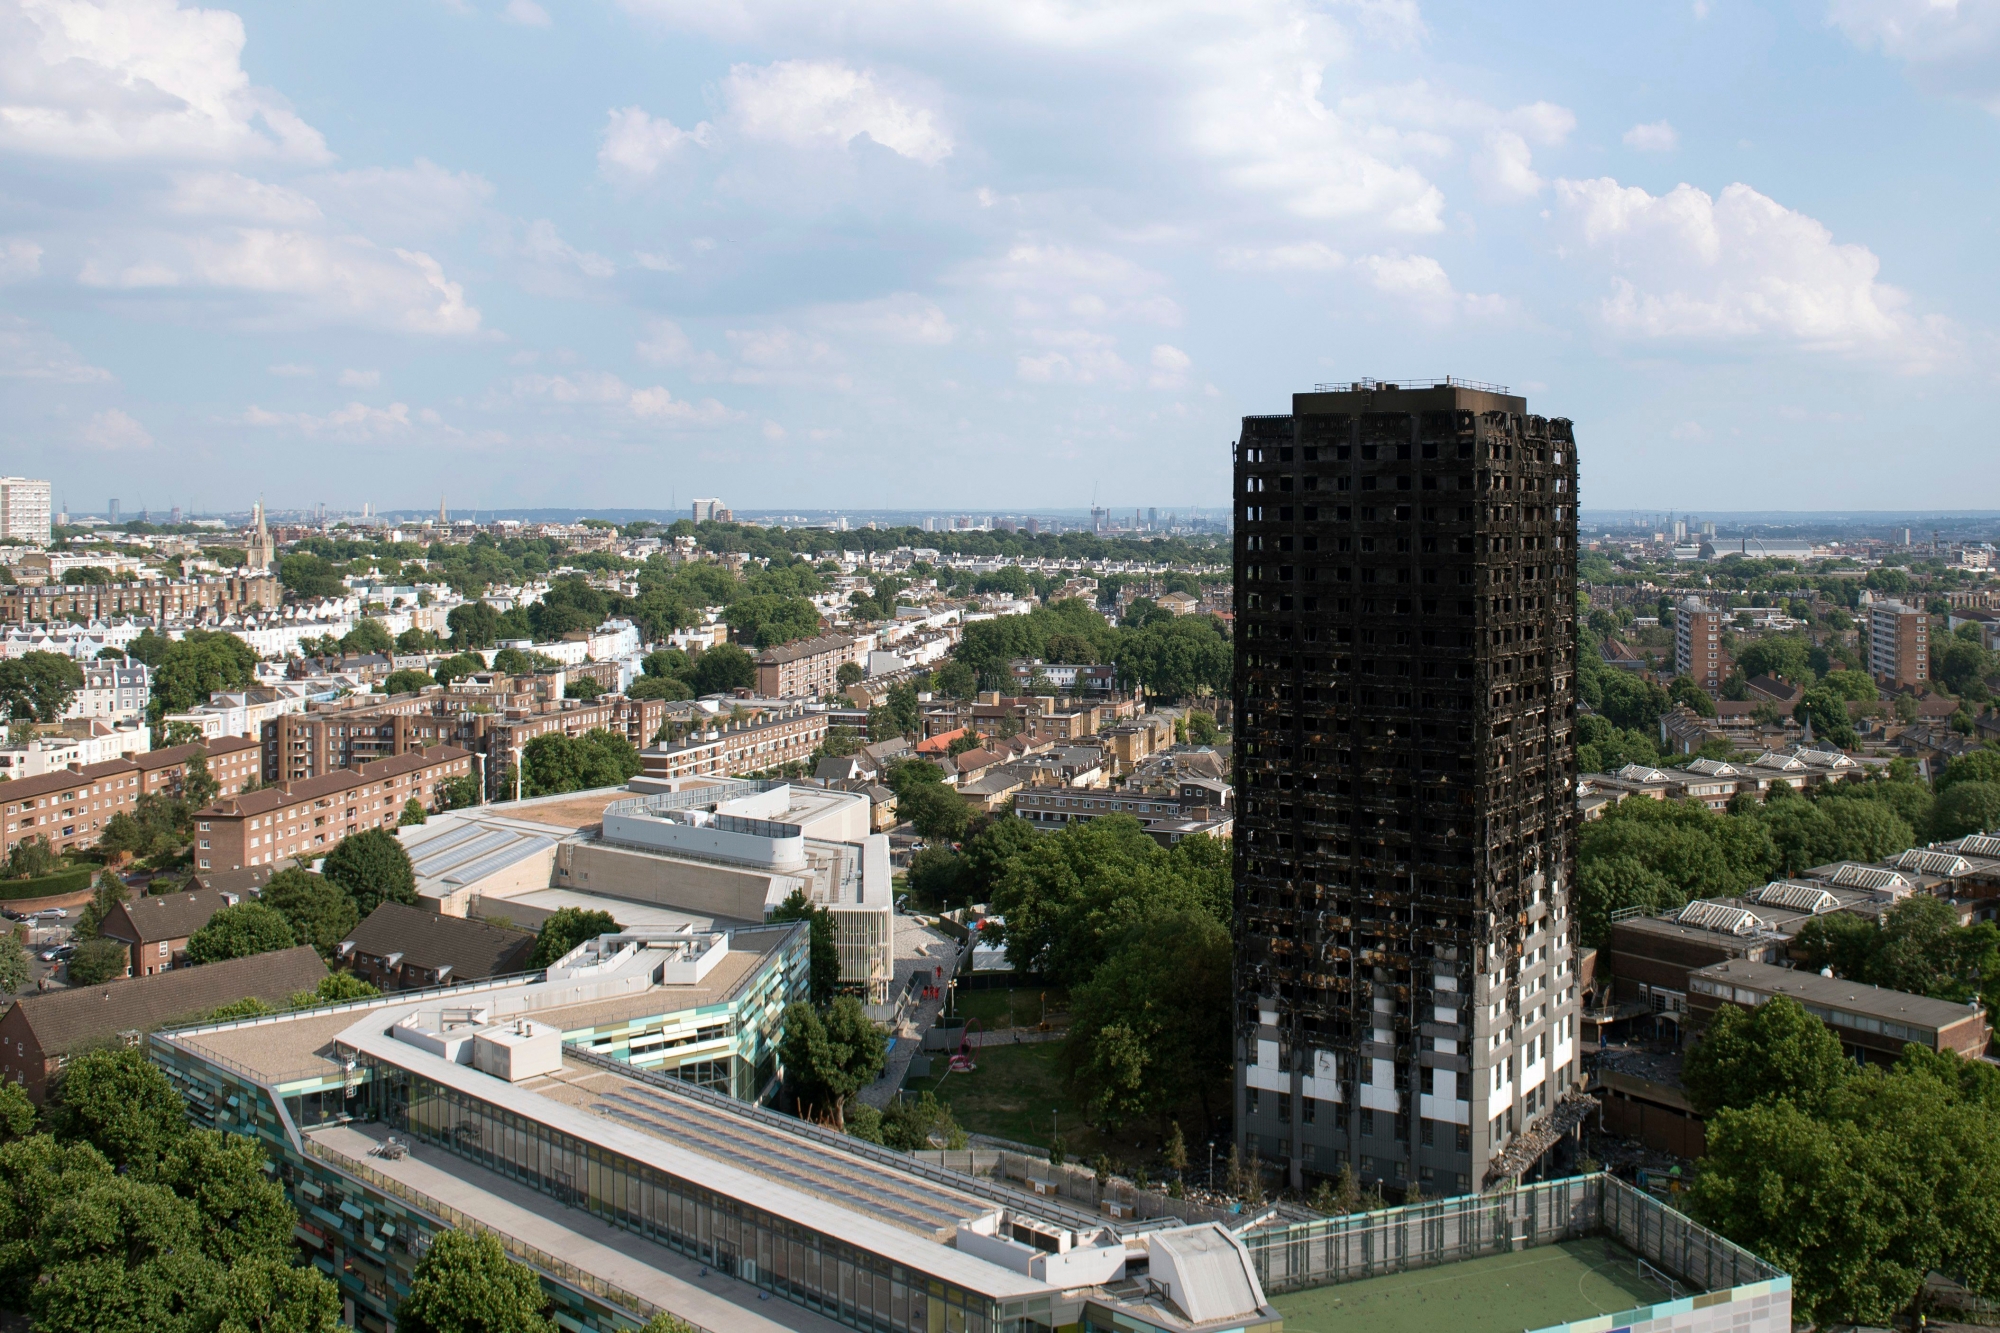 epa06035746 A general view of the remains of Grenfell Tower, a 24-storey apartment block in North Kensington, London, Britain, 18 June 2017. Search and Rescue efforts are continuing to sift through the burnt out remains of the tower. At least 58 people are now missing and presumed dead in the Grenfell Tower disaster, police have said. This latest figure includes the 30 already confirmed to have died in the fire.The cause of the fire is yet not known.  EPA/WILL OLIVER BRITAIN TOWER BLOCK FIRE AFTERMATH